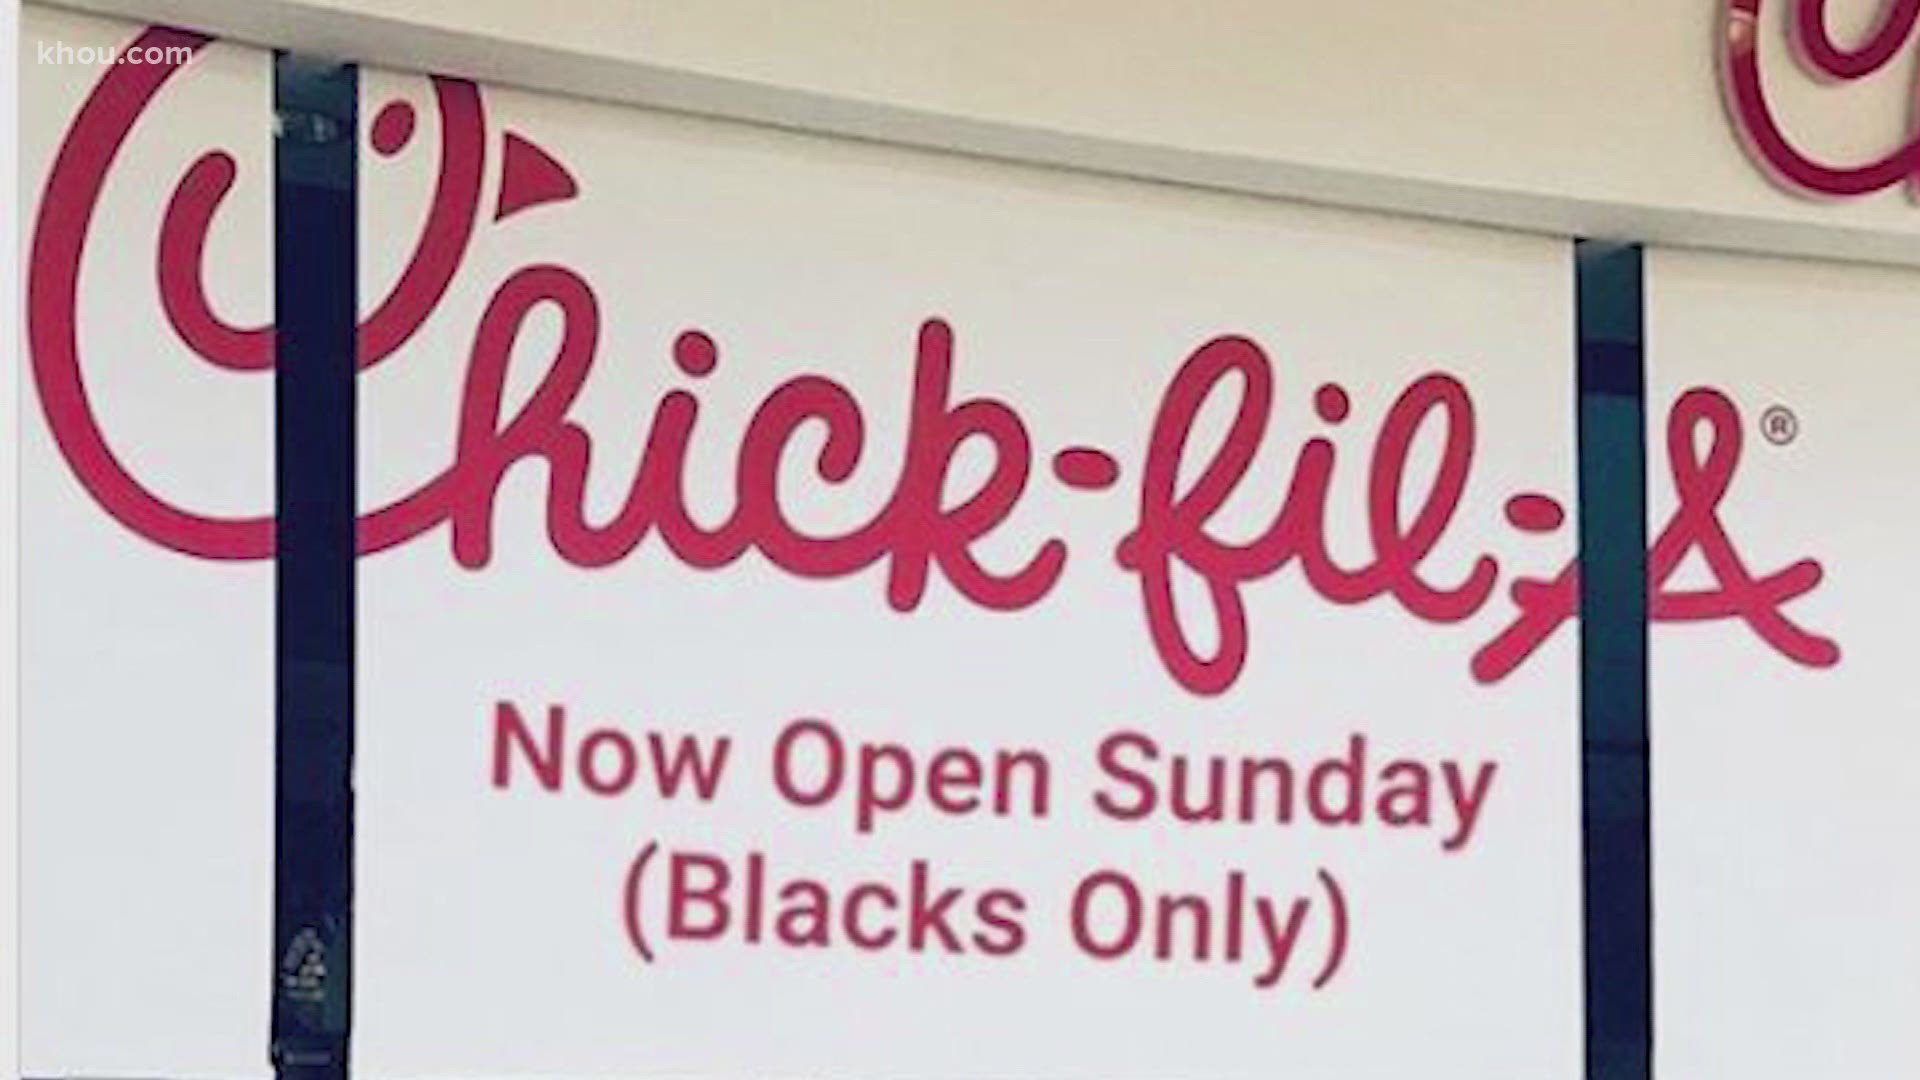 Chick-fil-A has always been closed on Sundays, and despite viral social post, that's not changing.